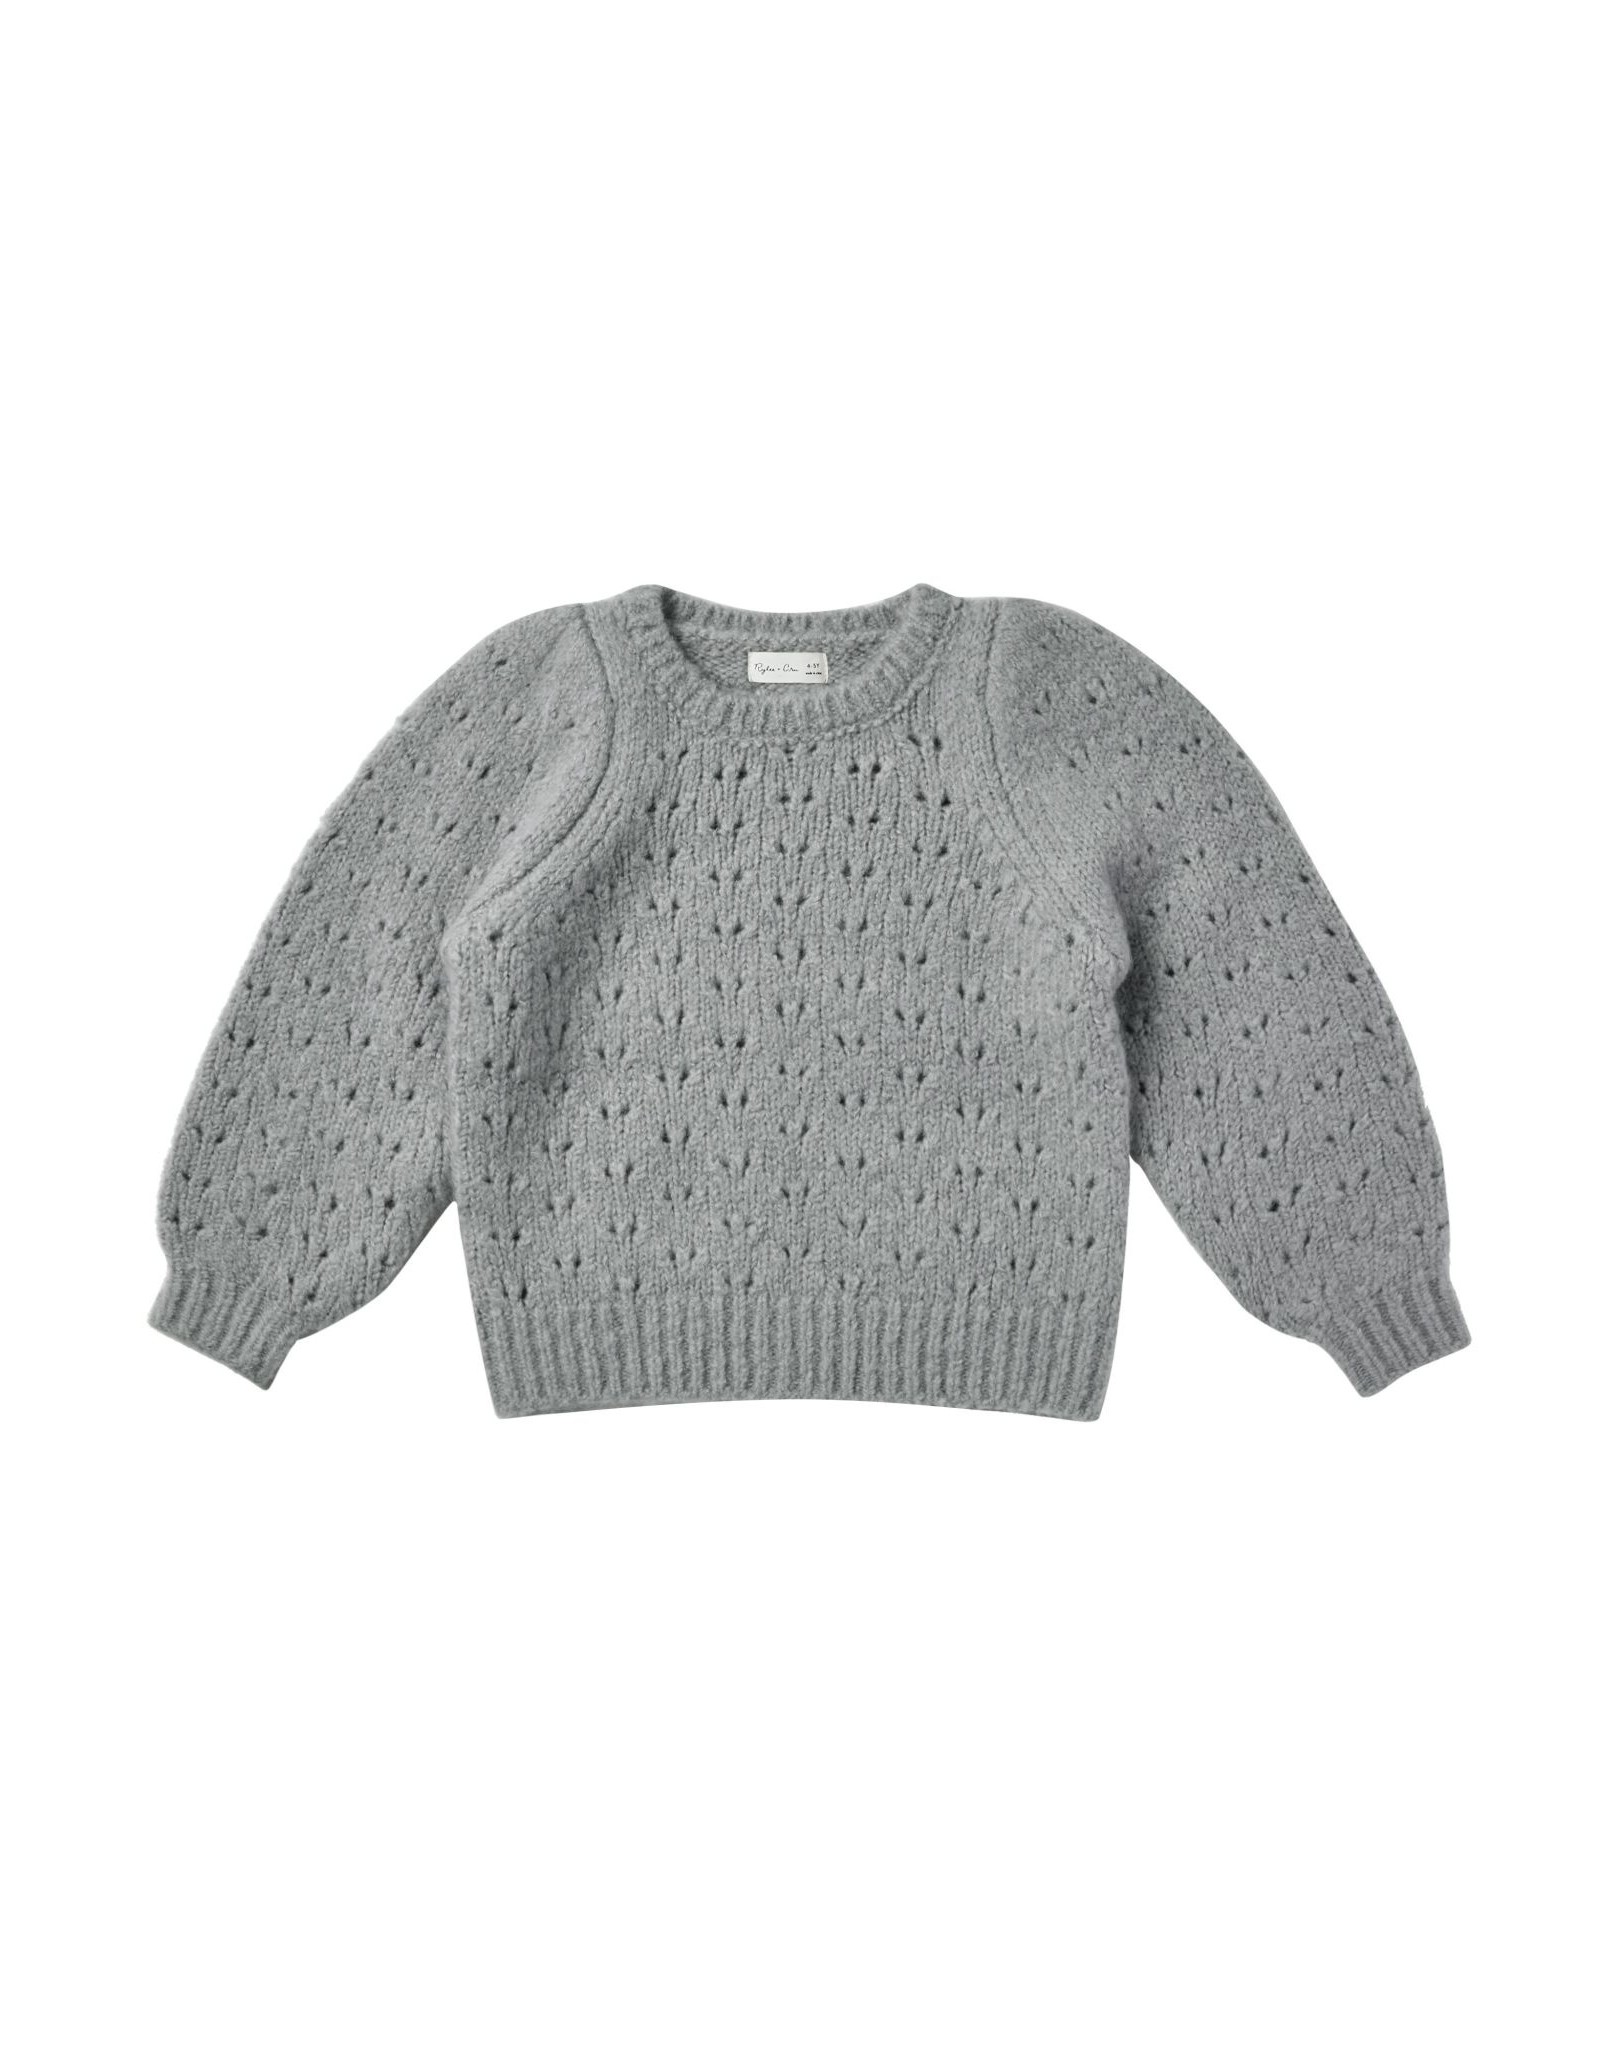 Rylee and Cru balloon sweater- dusty blue